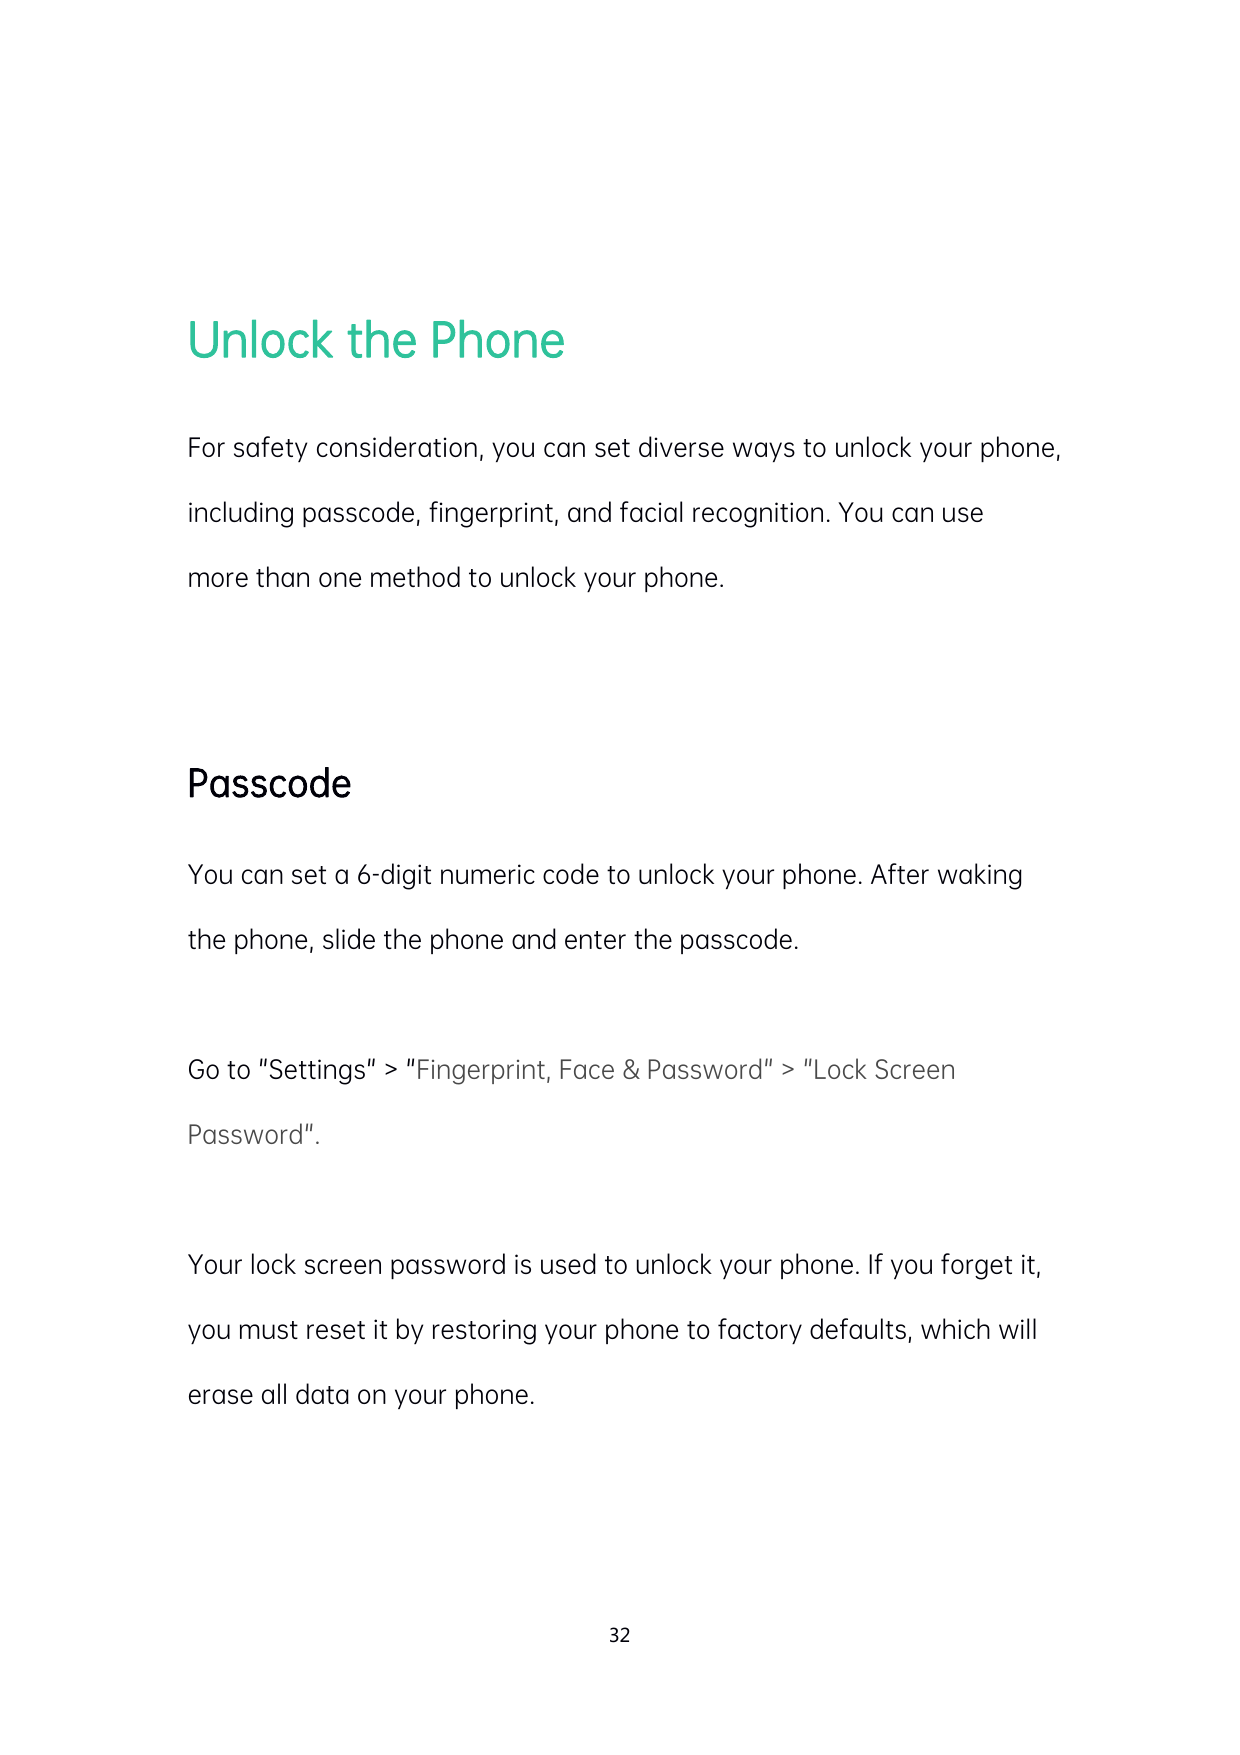 Unlock the PhoneFor safety consideration, you can set diverse ways to unlock your phone,including passcode, fingerprint, and fac